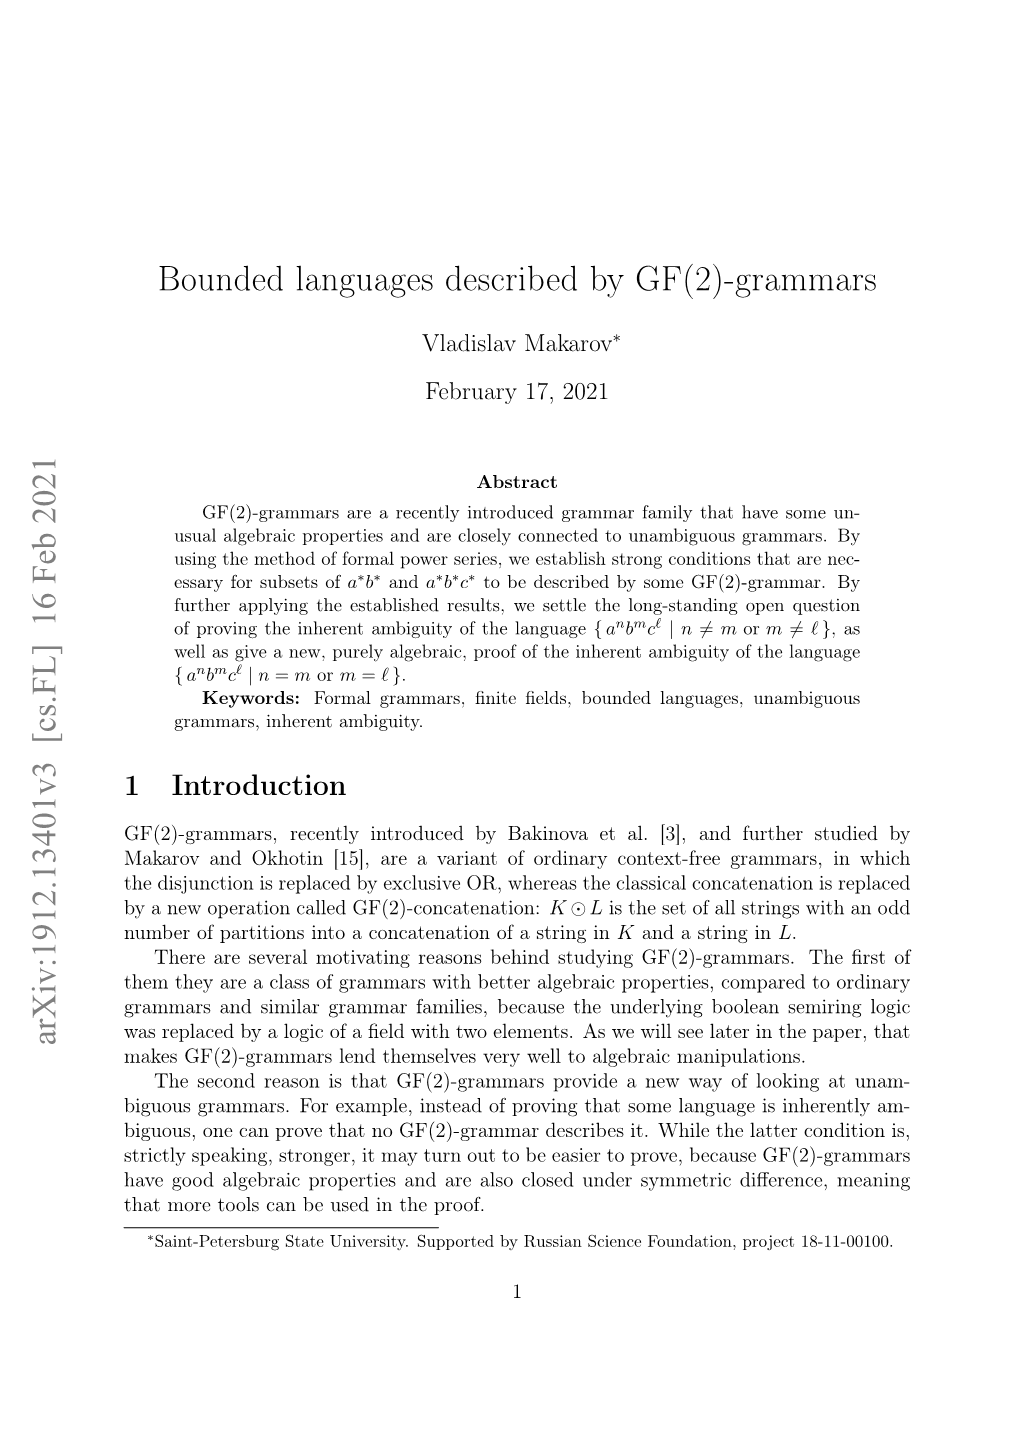 Bounded Languages Described by GF(2)-Grammars